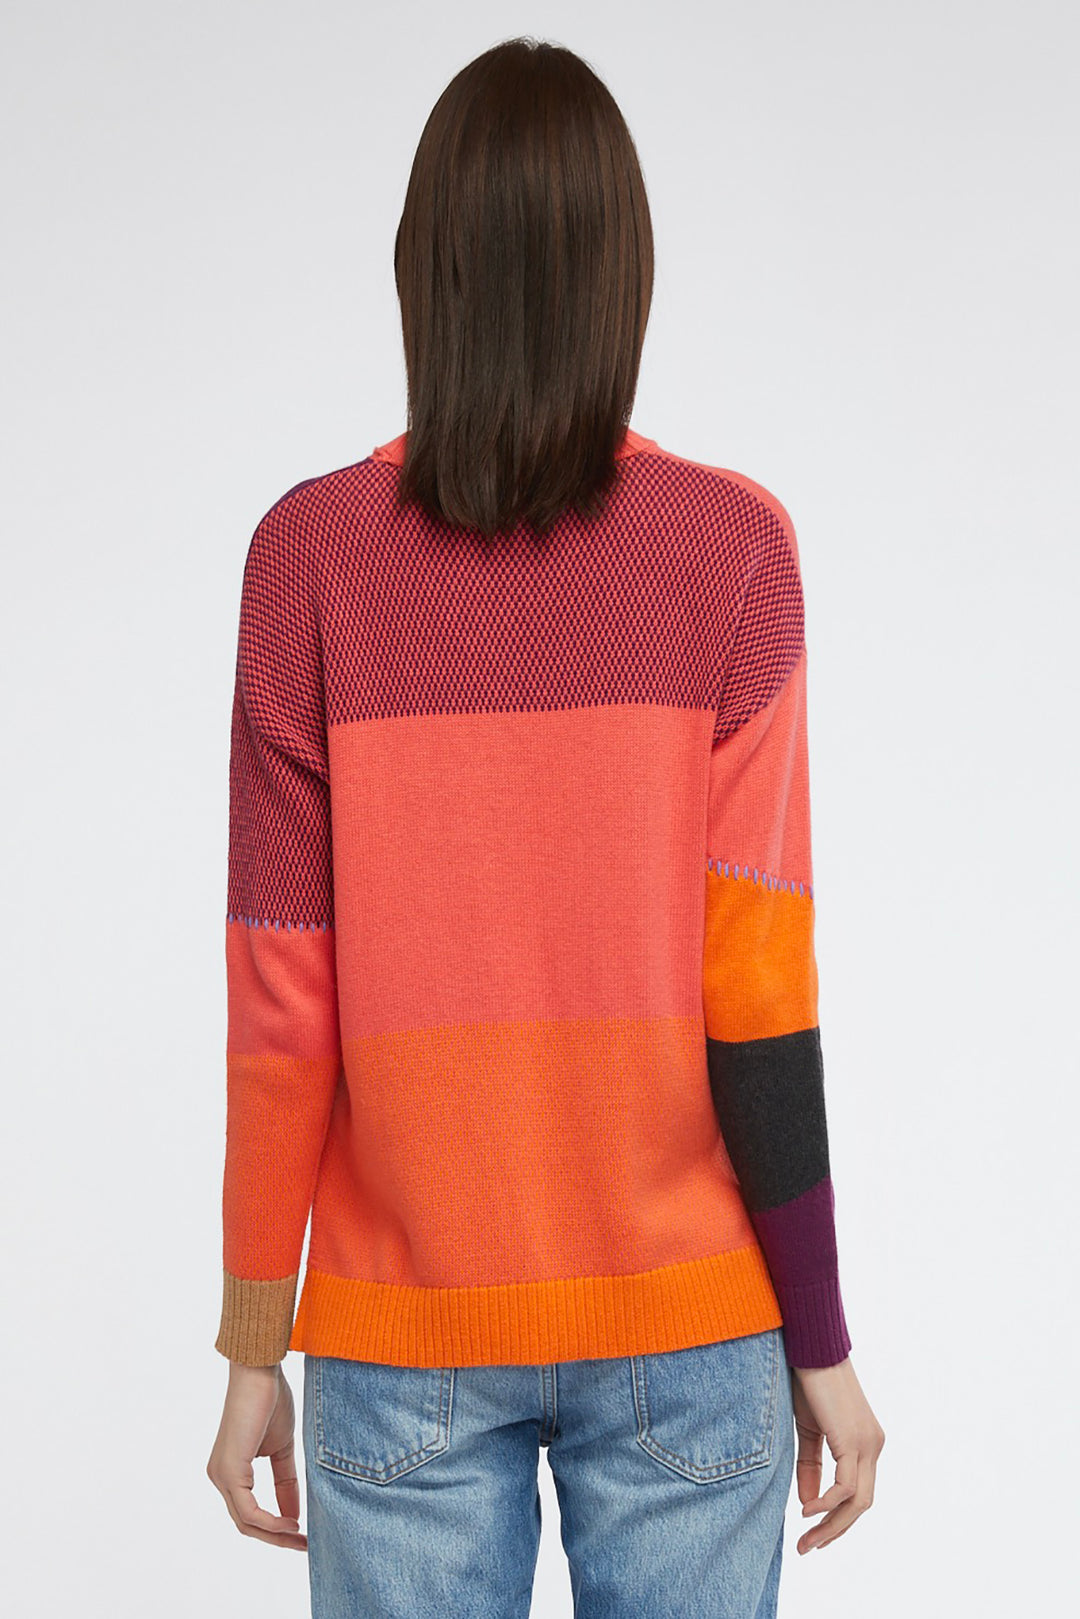 patchwork jumper in dubarry by Zaket & Plover back view